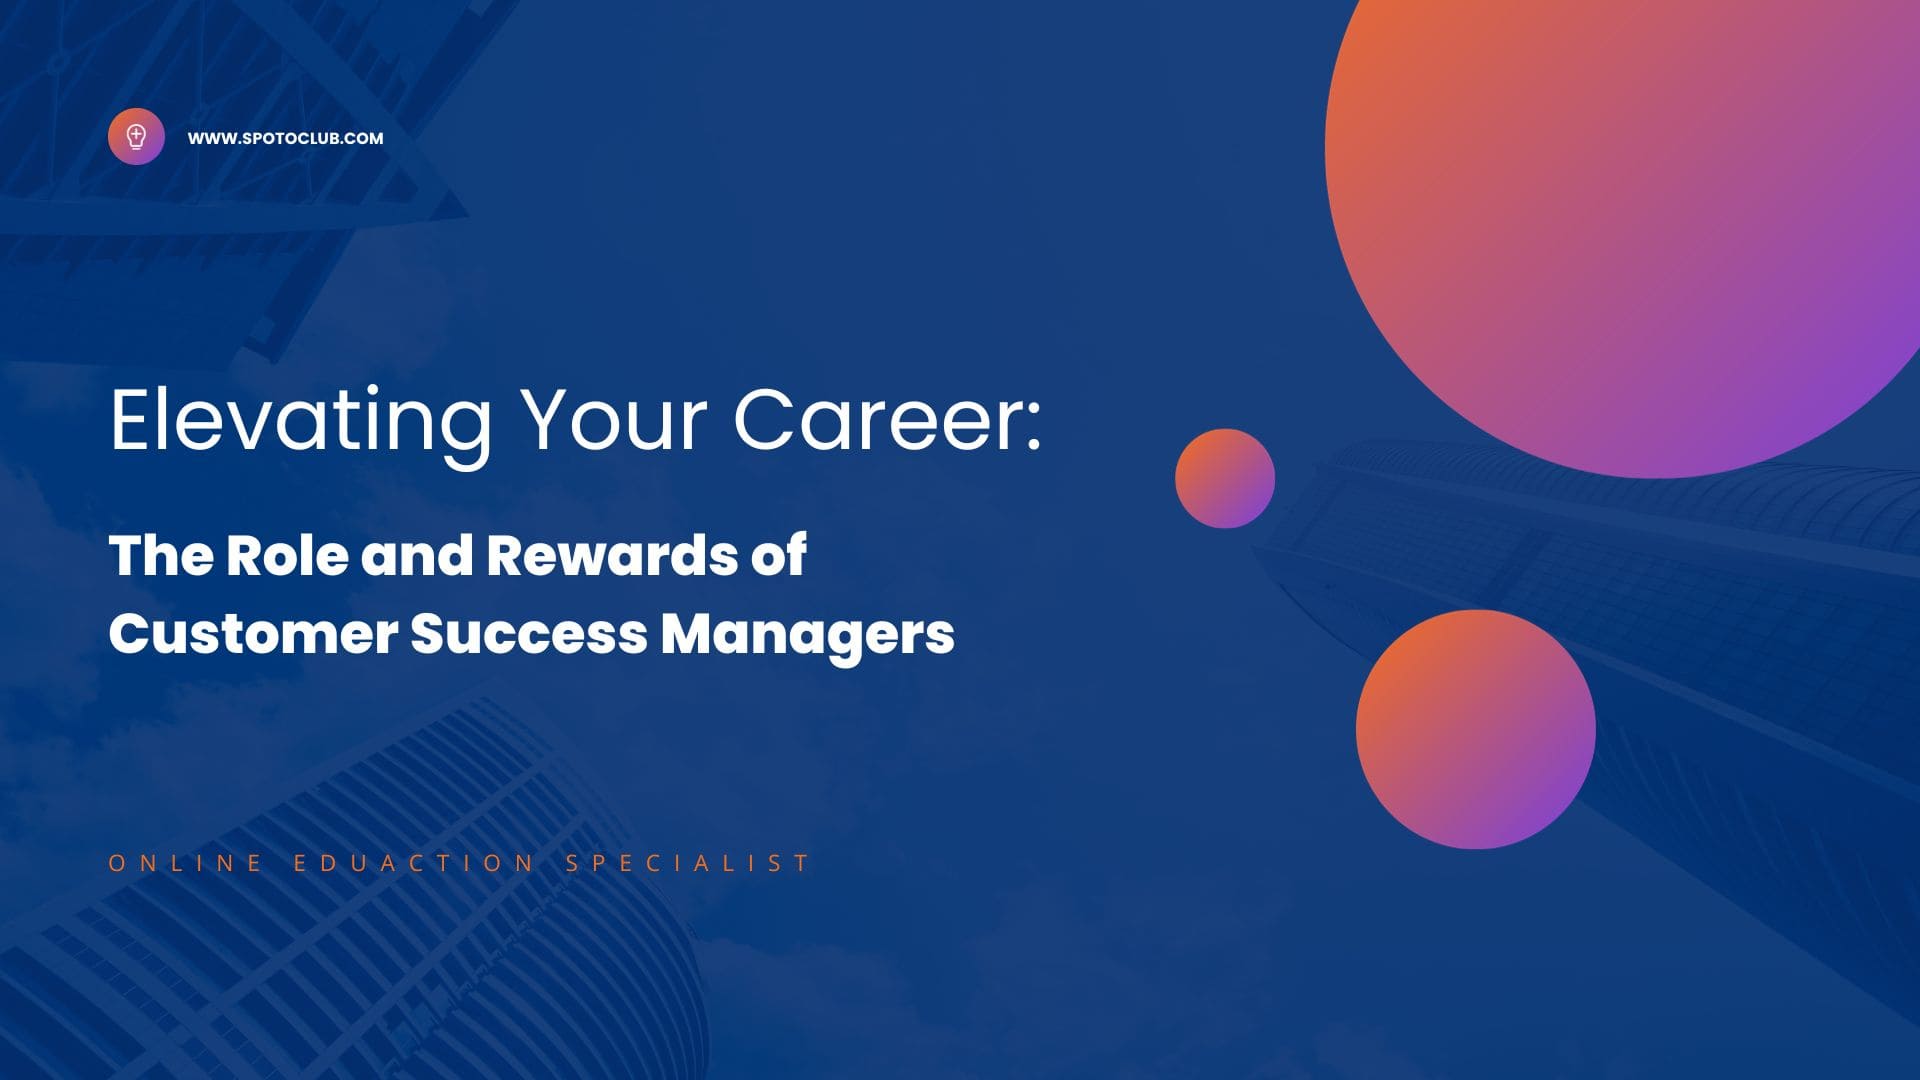 The Role and Rewards of Customer Success Managers